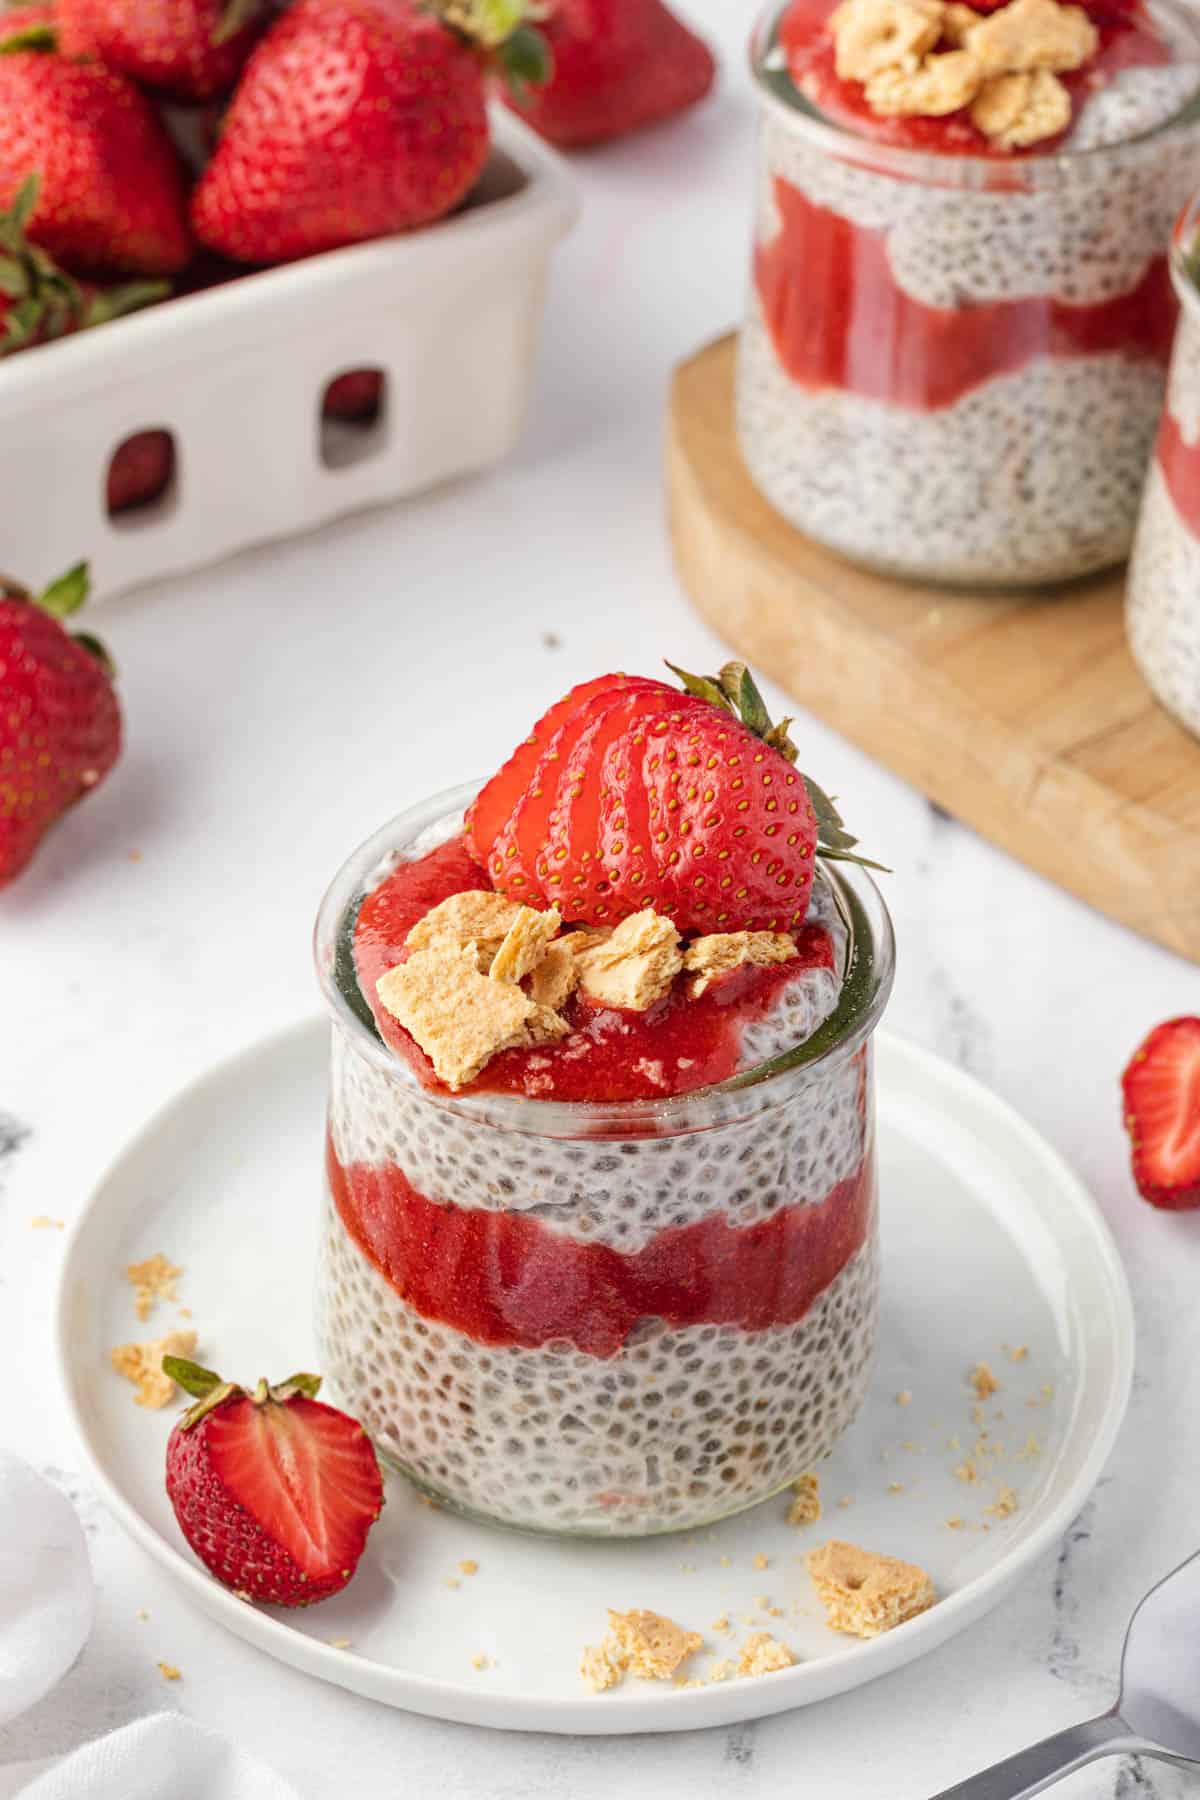 An angled image of a sliced strawberry and broken up graham crackers topping a jar of chia seed pudding.